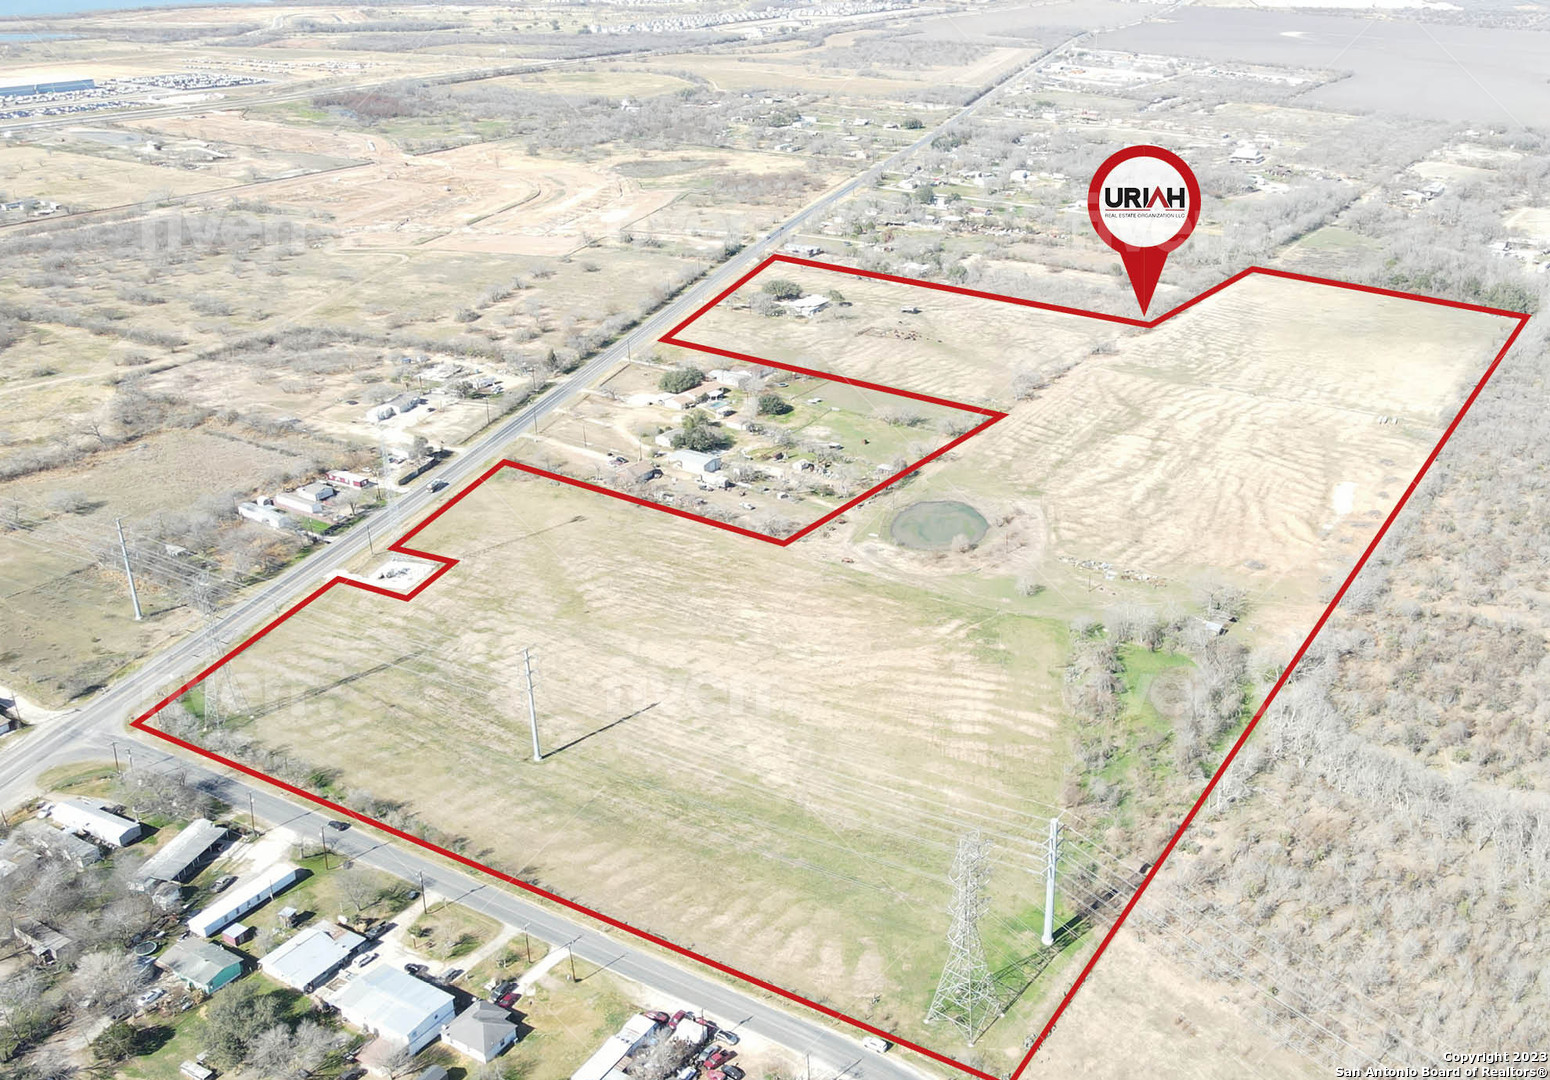 Uriah Real Estate is pleased to present a unique opportunity to purchase a 40 +/- acre property in the rapidly developing south side of San Antonio, located just 4 miles south of Highway 410 and Highway 281. This property has 1,135 ft of frontage on S. Flores and 837 ft on Blue Wing Rd., and is zoned OCL providing an ideal platform for high-density development, single family living, and/or mixed-use development. The land benefits from access to sewer, electricity, and water, and the area has seen a steady surge in commercial development with companies such as Toyota Manufacturing Facility, TJ Maxx Distribution Center and Navistar, allowing businesses to take advantage of the resources in the area. Additionally, Texas A&M University and Palo Alto College are nearby, further contributing to the increased workforce and corporate interest that this property offers